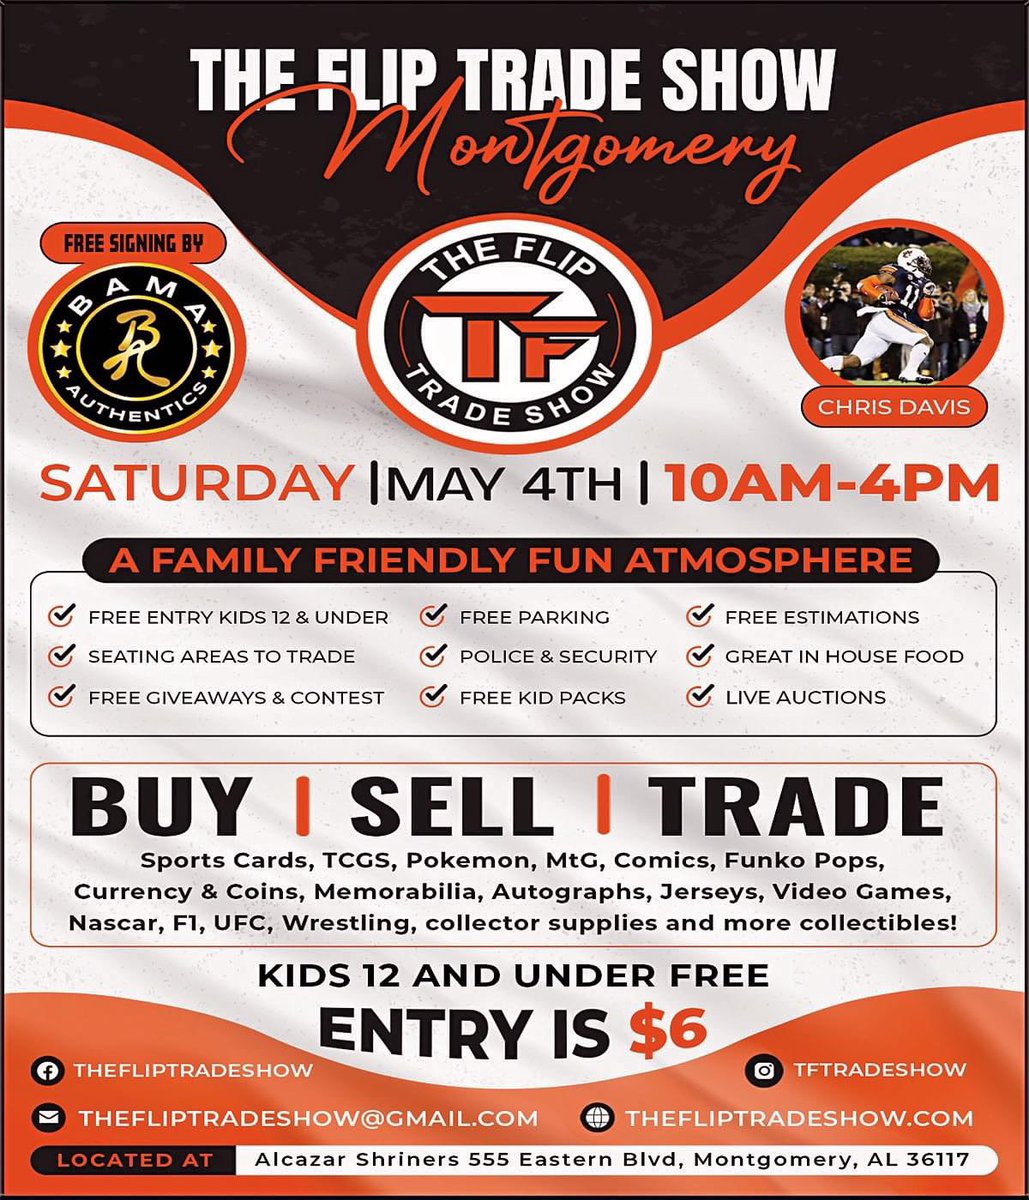 Montgomery folks, I’ll be up there Saturday for our first card show as a vendor. Come by and see me! Chris Davis will also be there signing stuff! It’ll be a blast.